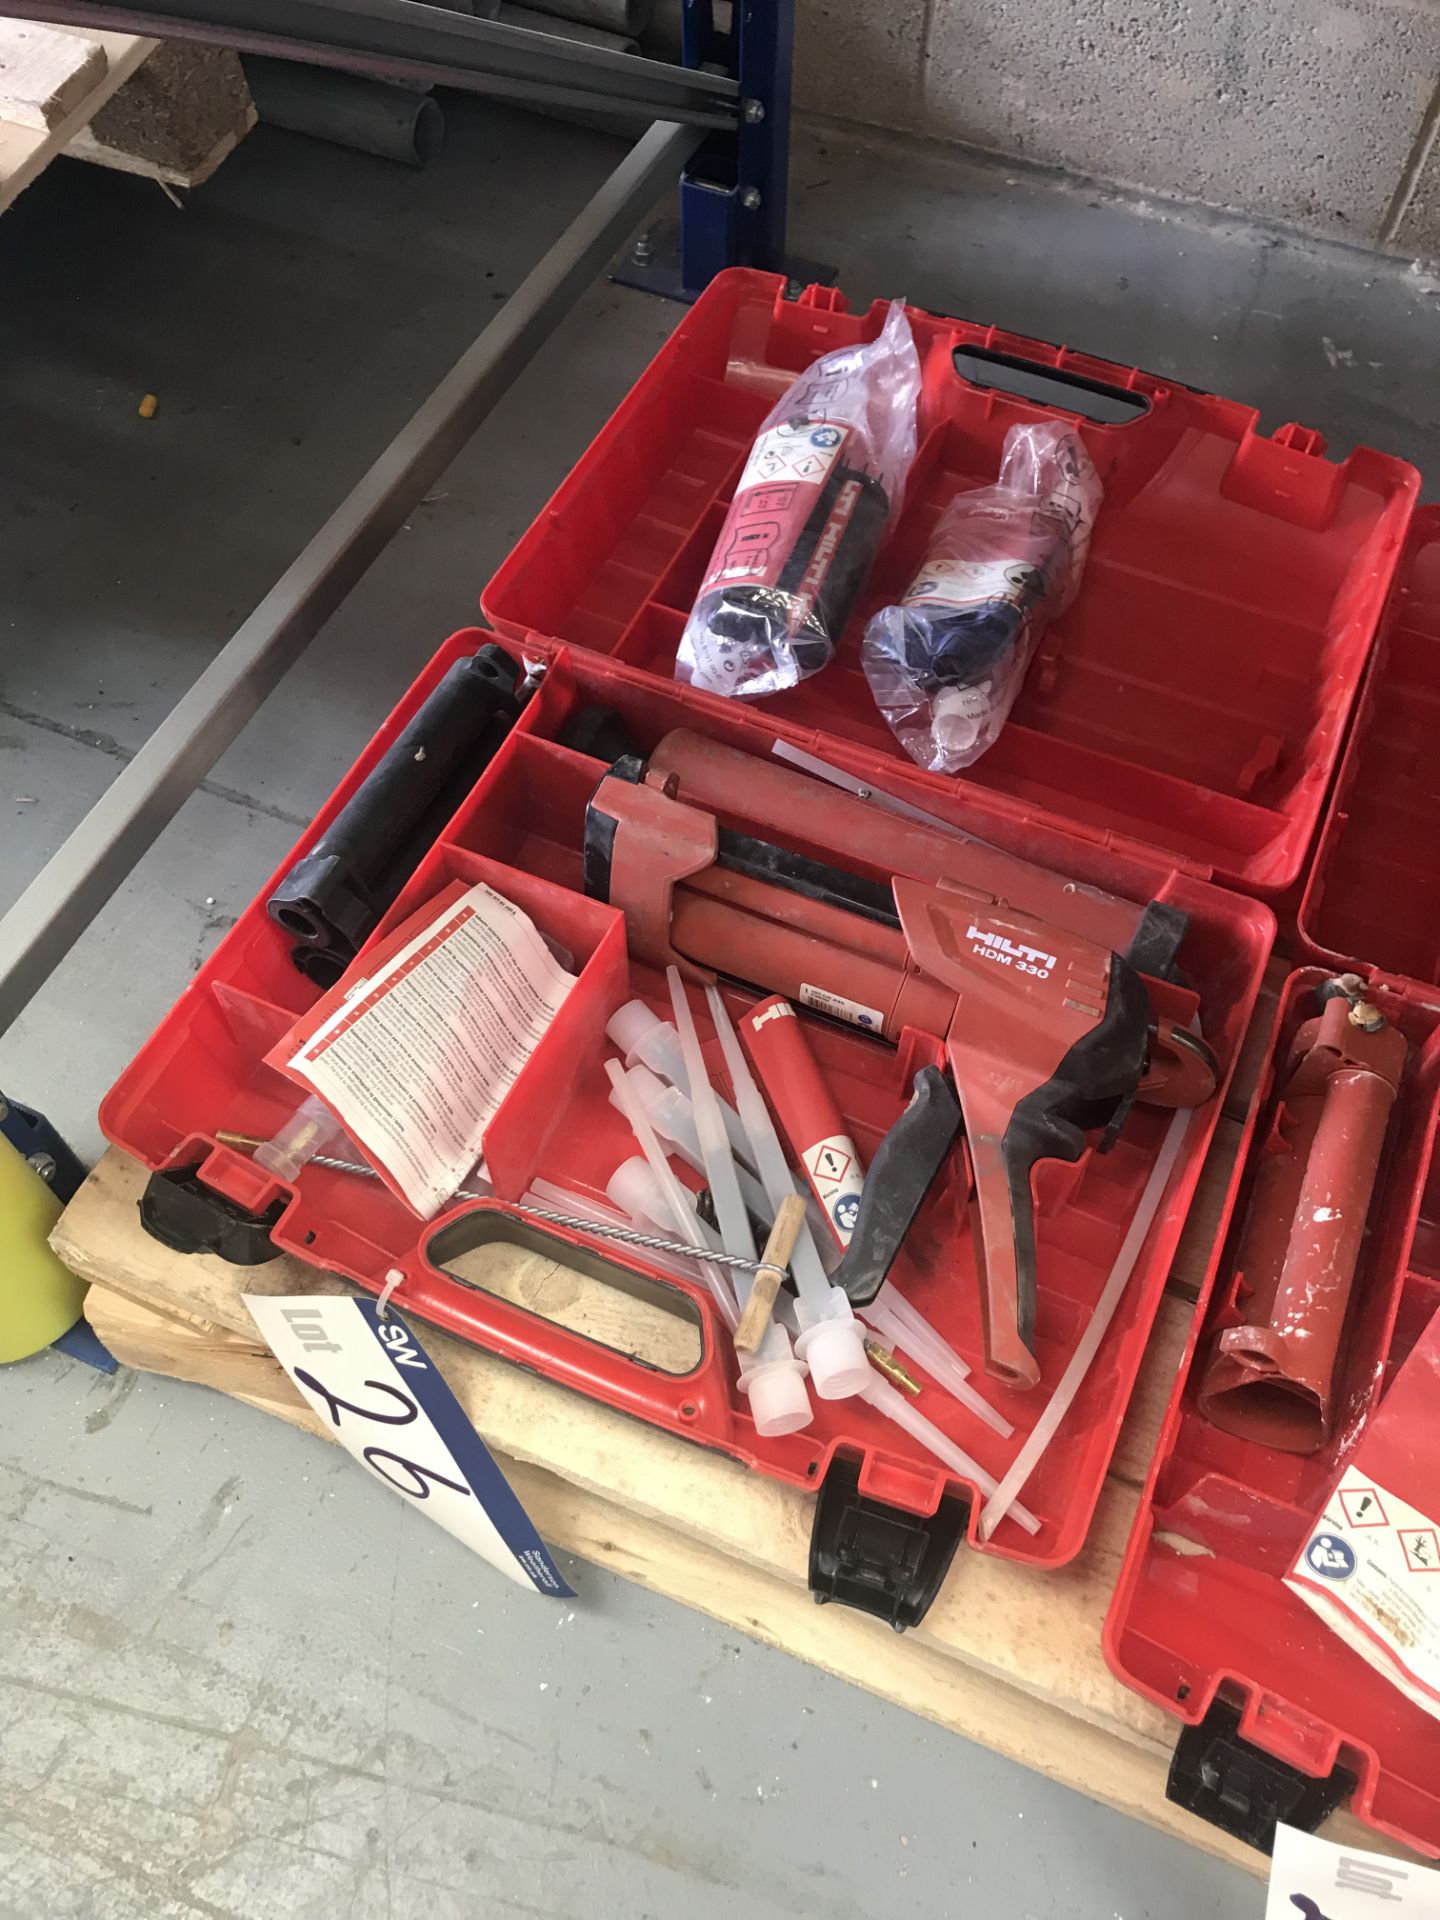 Hilti HDM330 Adhesive Anchoring System Gun, c/w hole blower, case and accessories